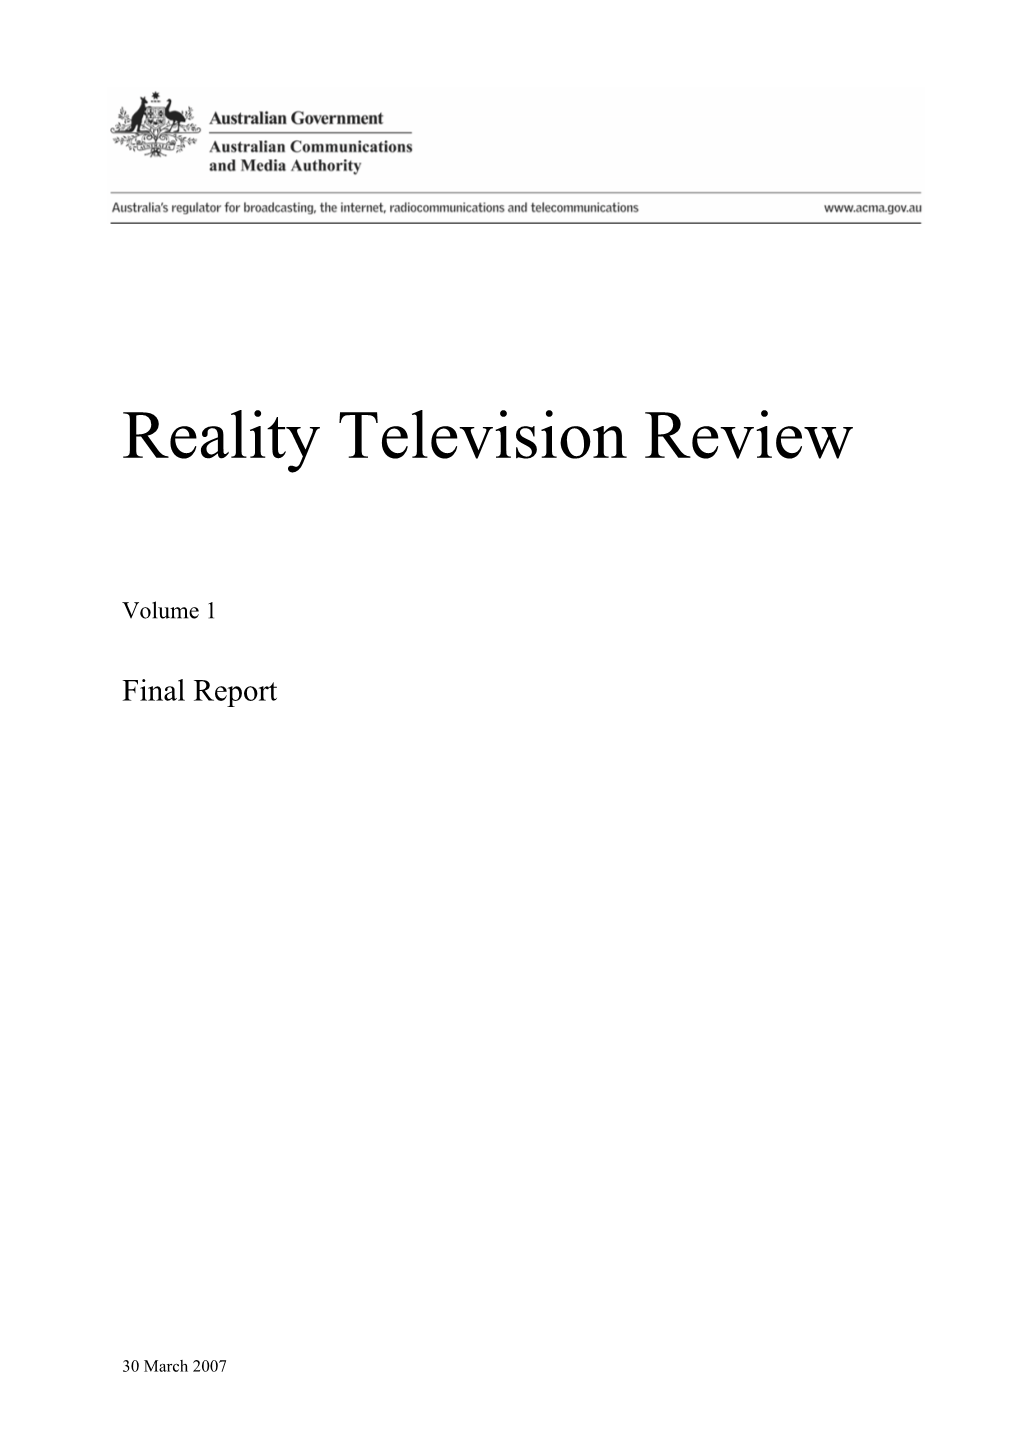 Reality Television Report